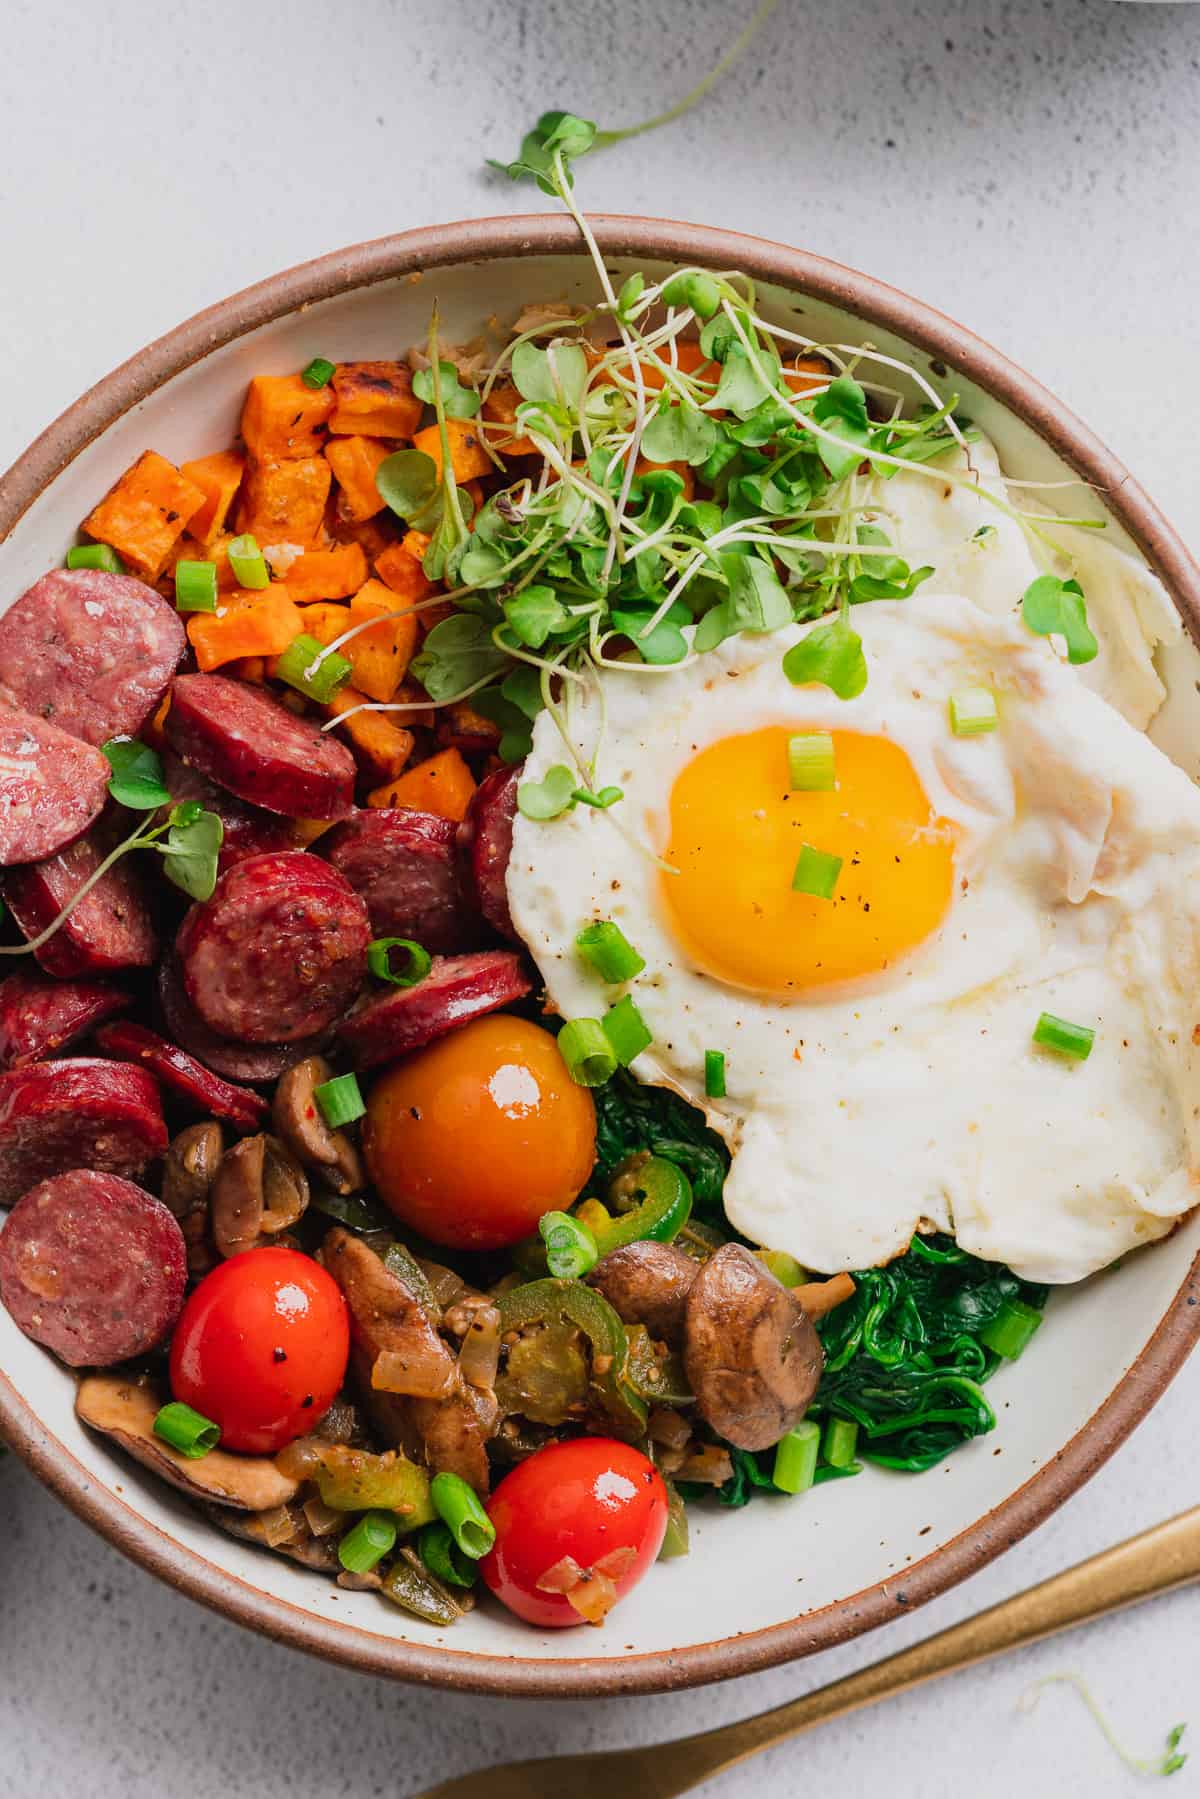 delicious energy bowl recipe with smoked sausage, veggies, and a fried egg